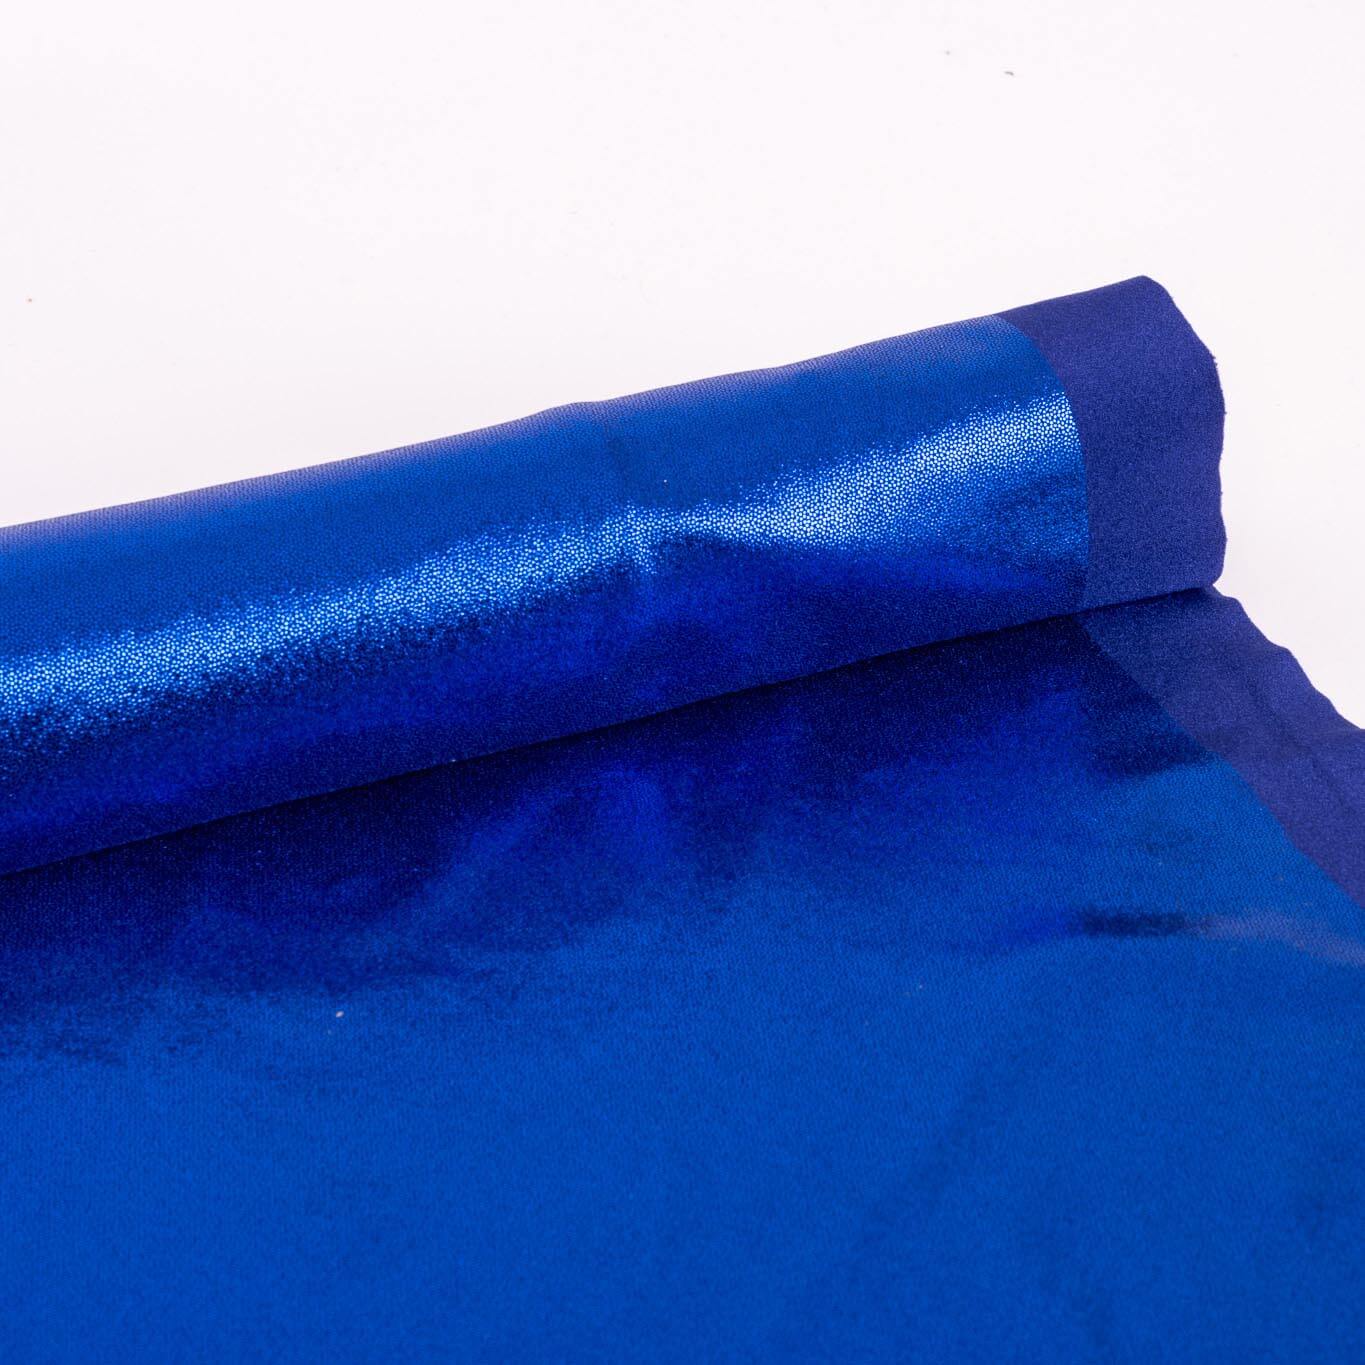 blue stretchy lycra knit fabric for dance costumes and activewear